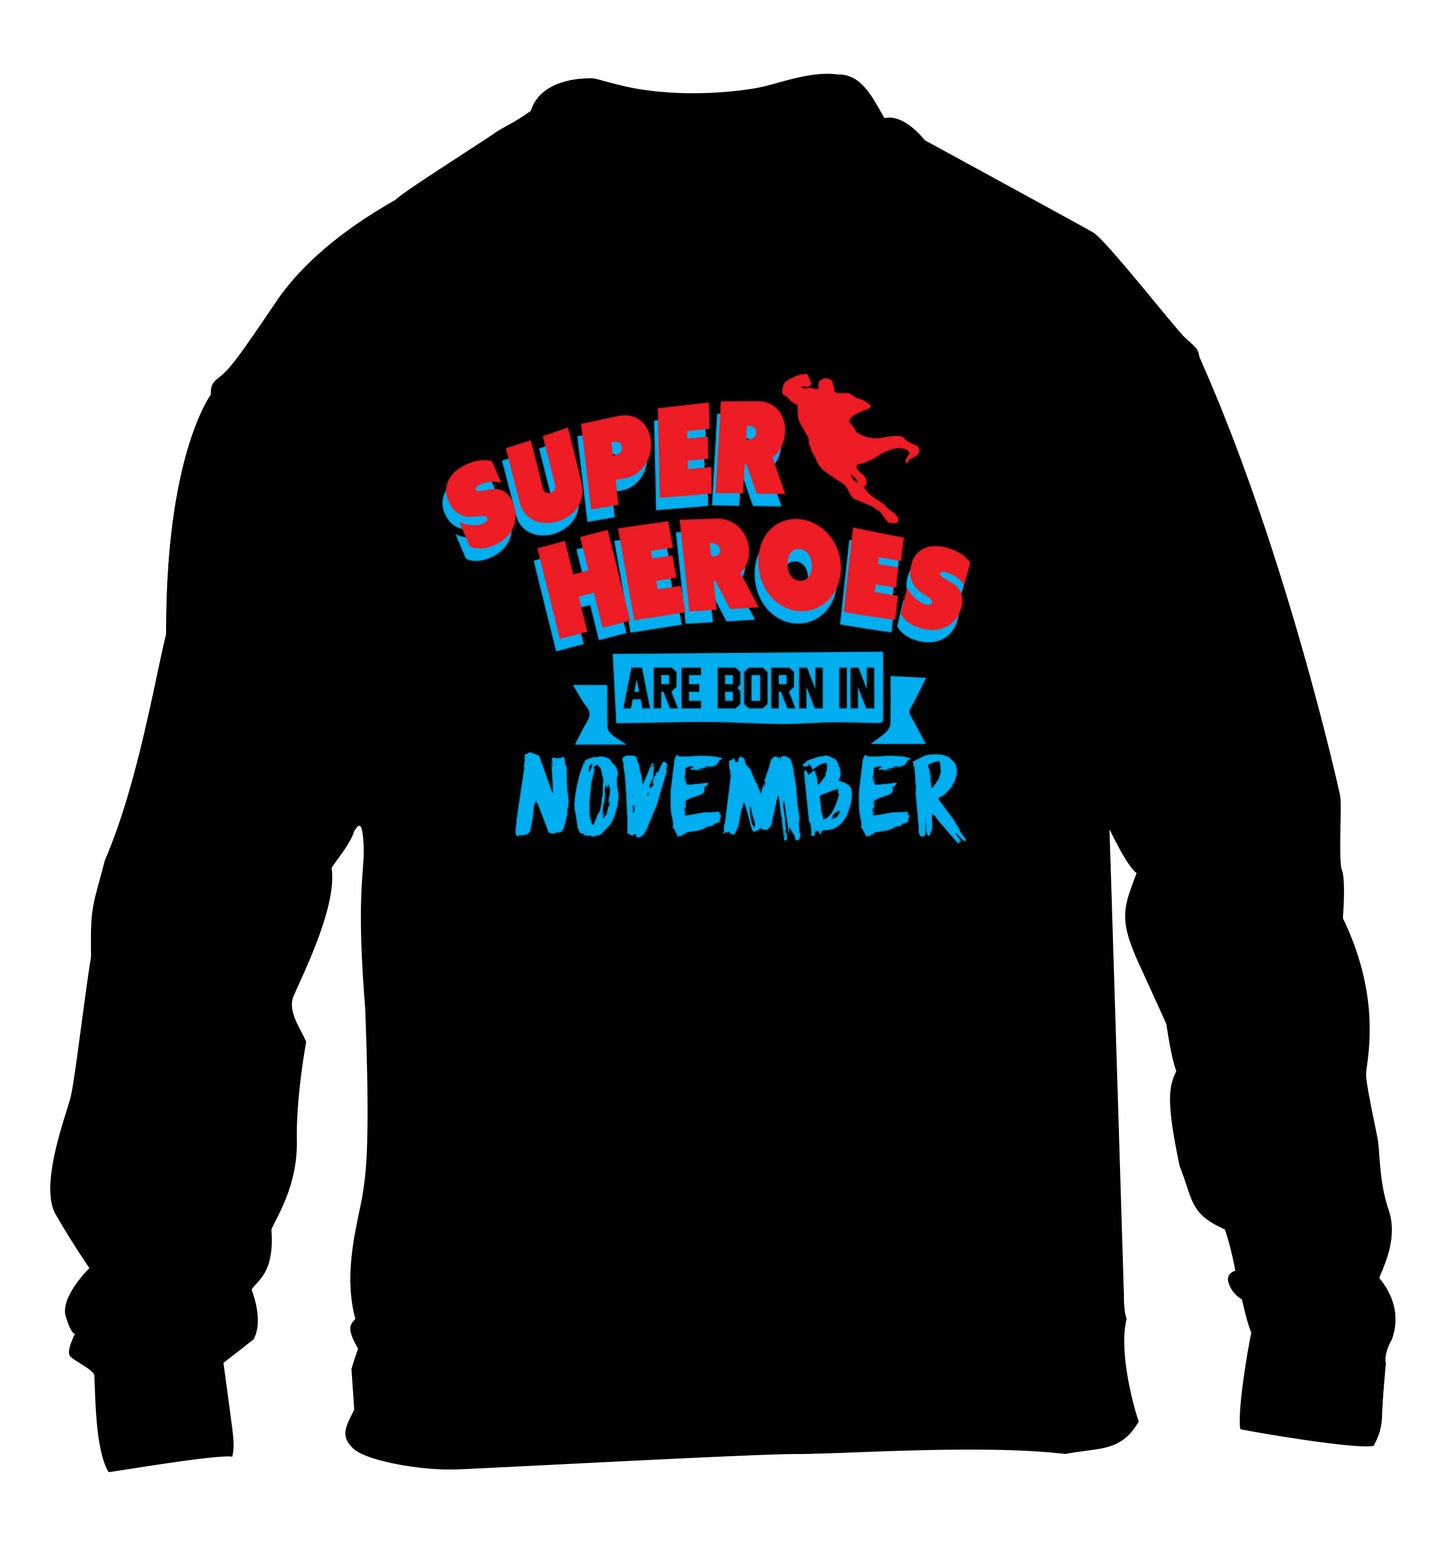 Superheroes are born in November children's black sweater 12-13 Years